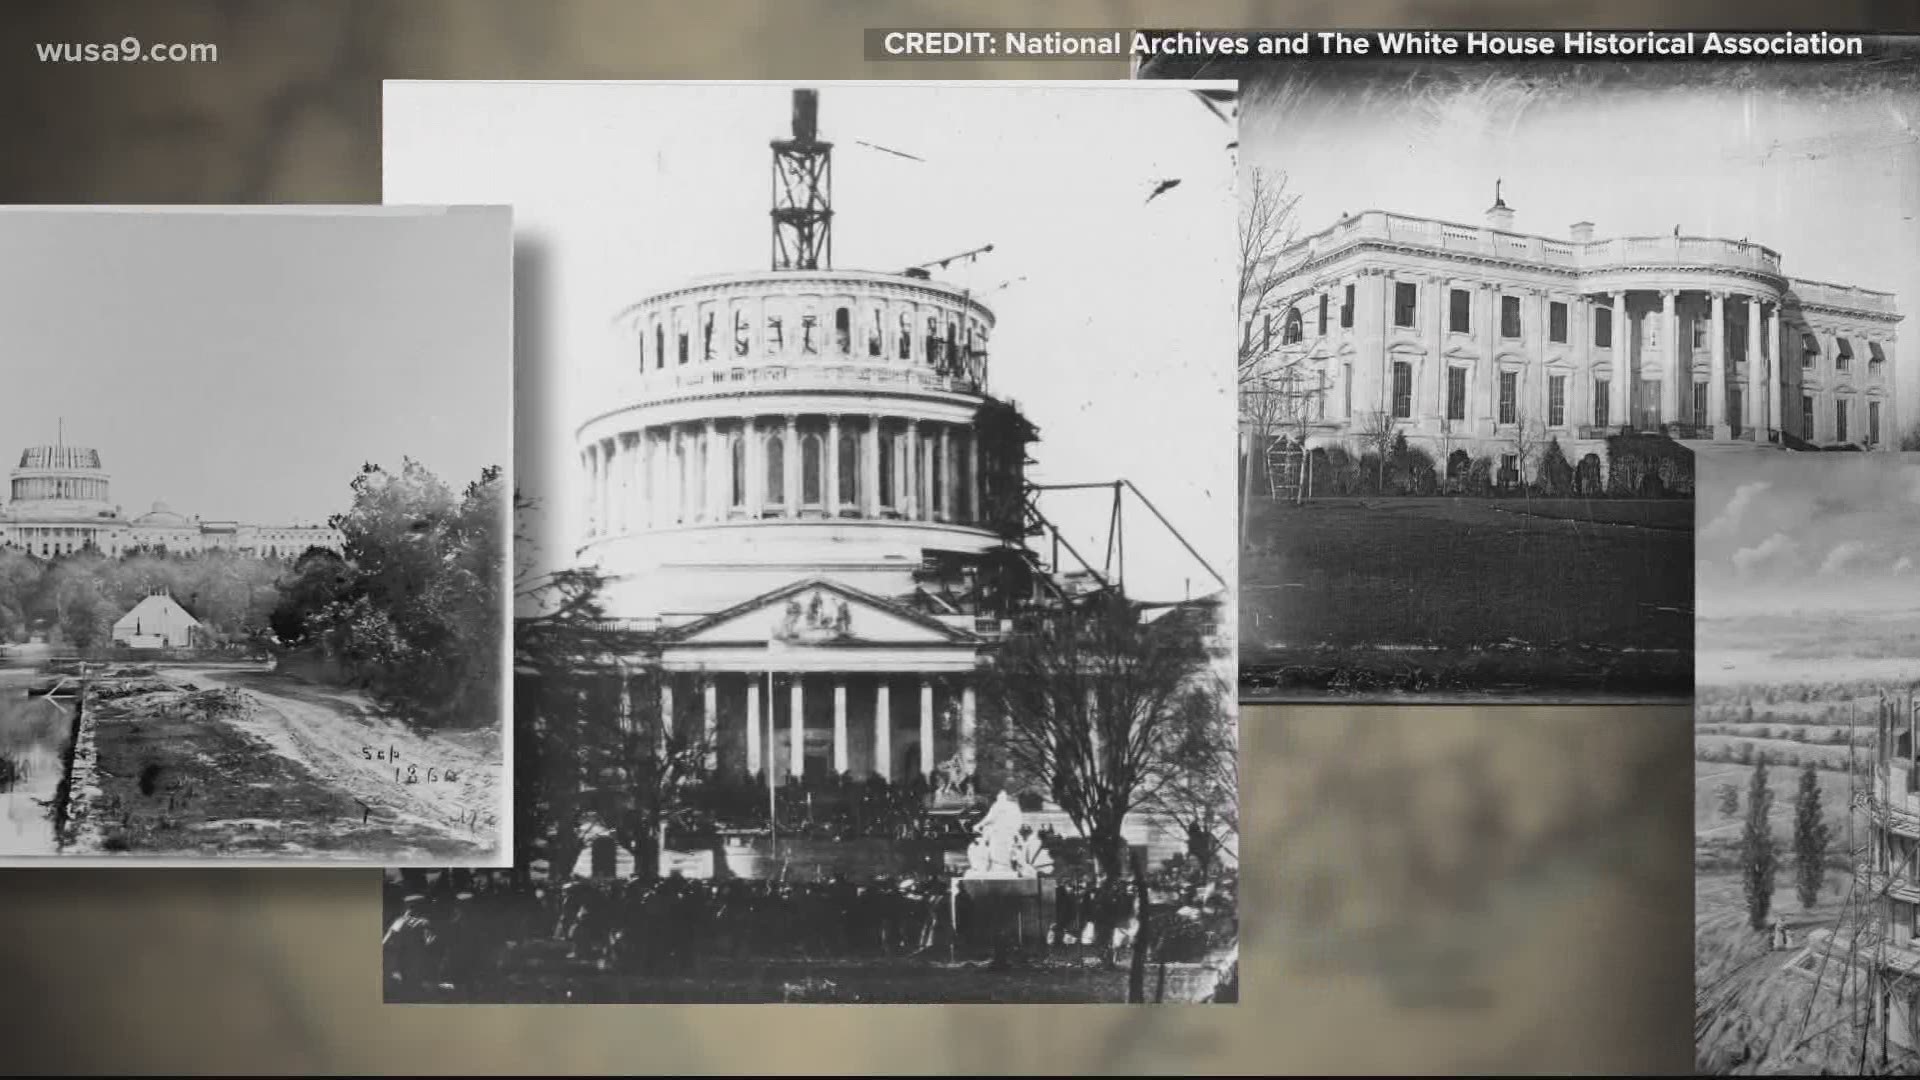 The National Archives have receipts that show slave owners were paid for the rental of their slaves to build the White House and the US Capitol